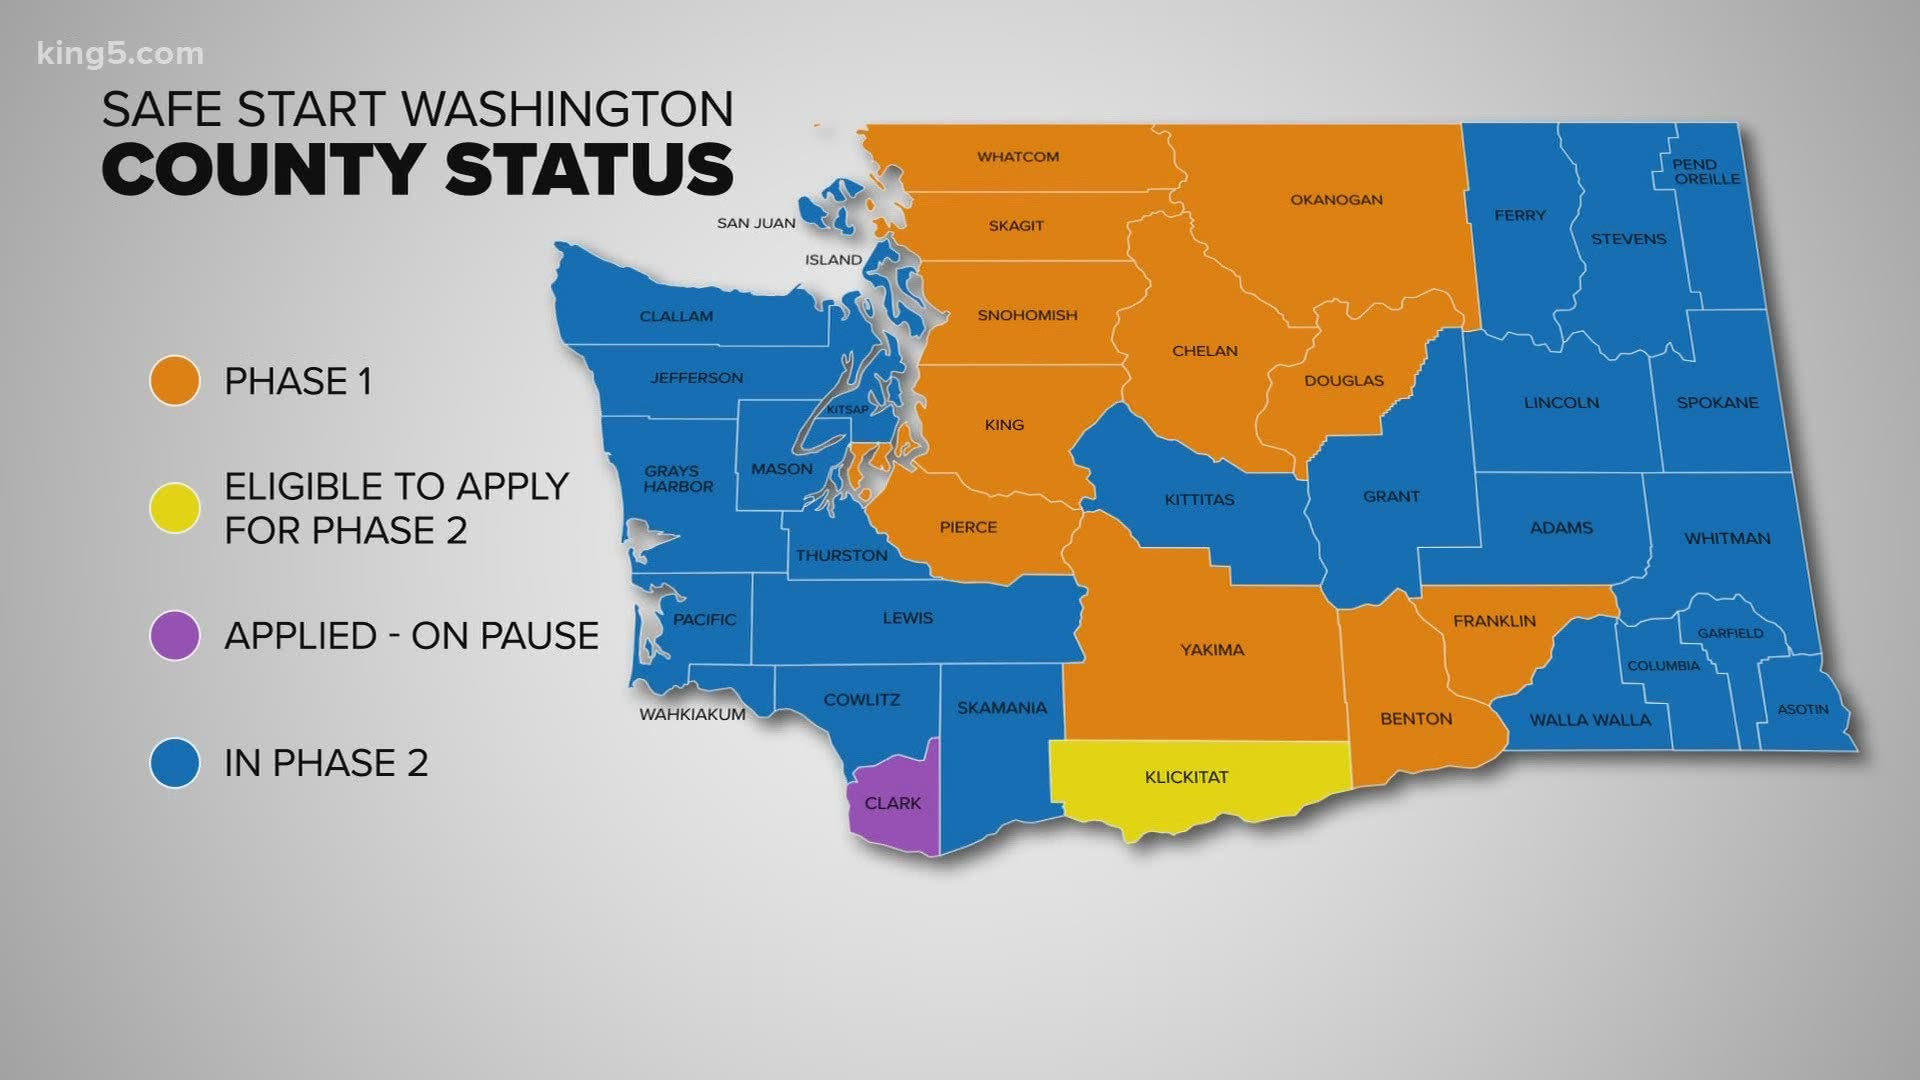 The latest on the coronavirus pandemic in Washington state from KING 5 News on May 28 at 4 p.m. More: www.king5.com/coronavirus.